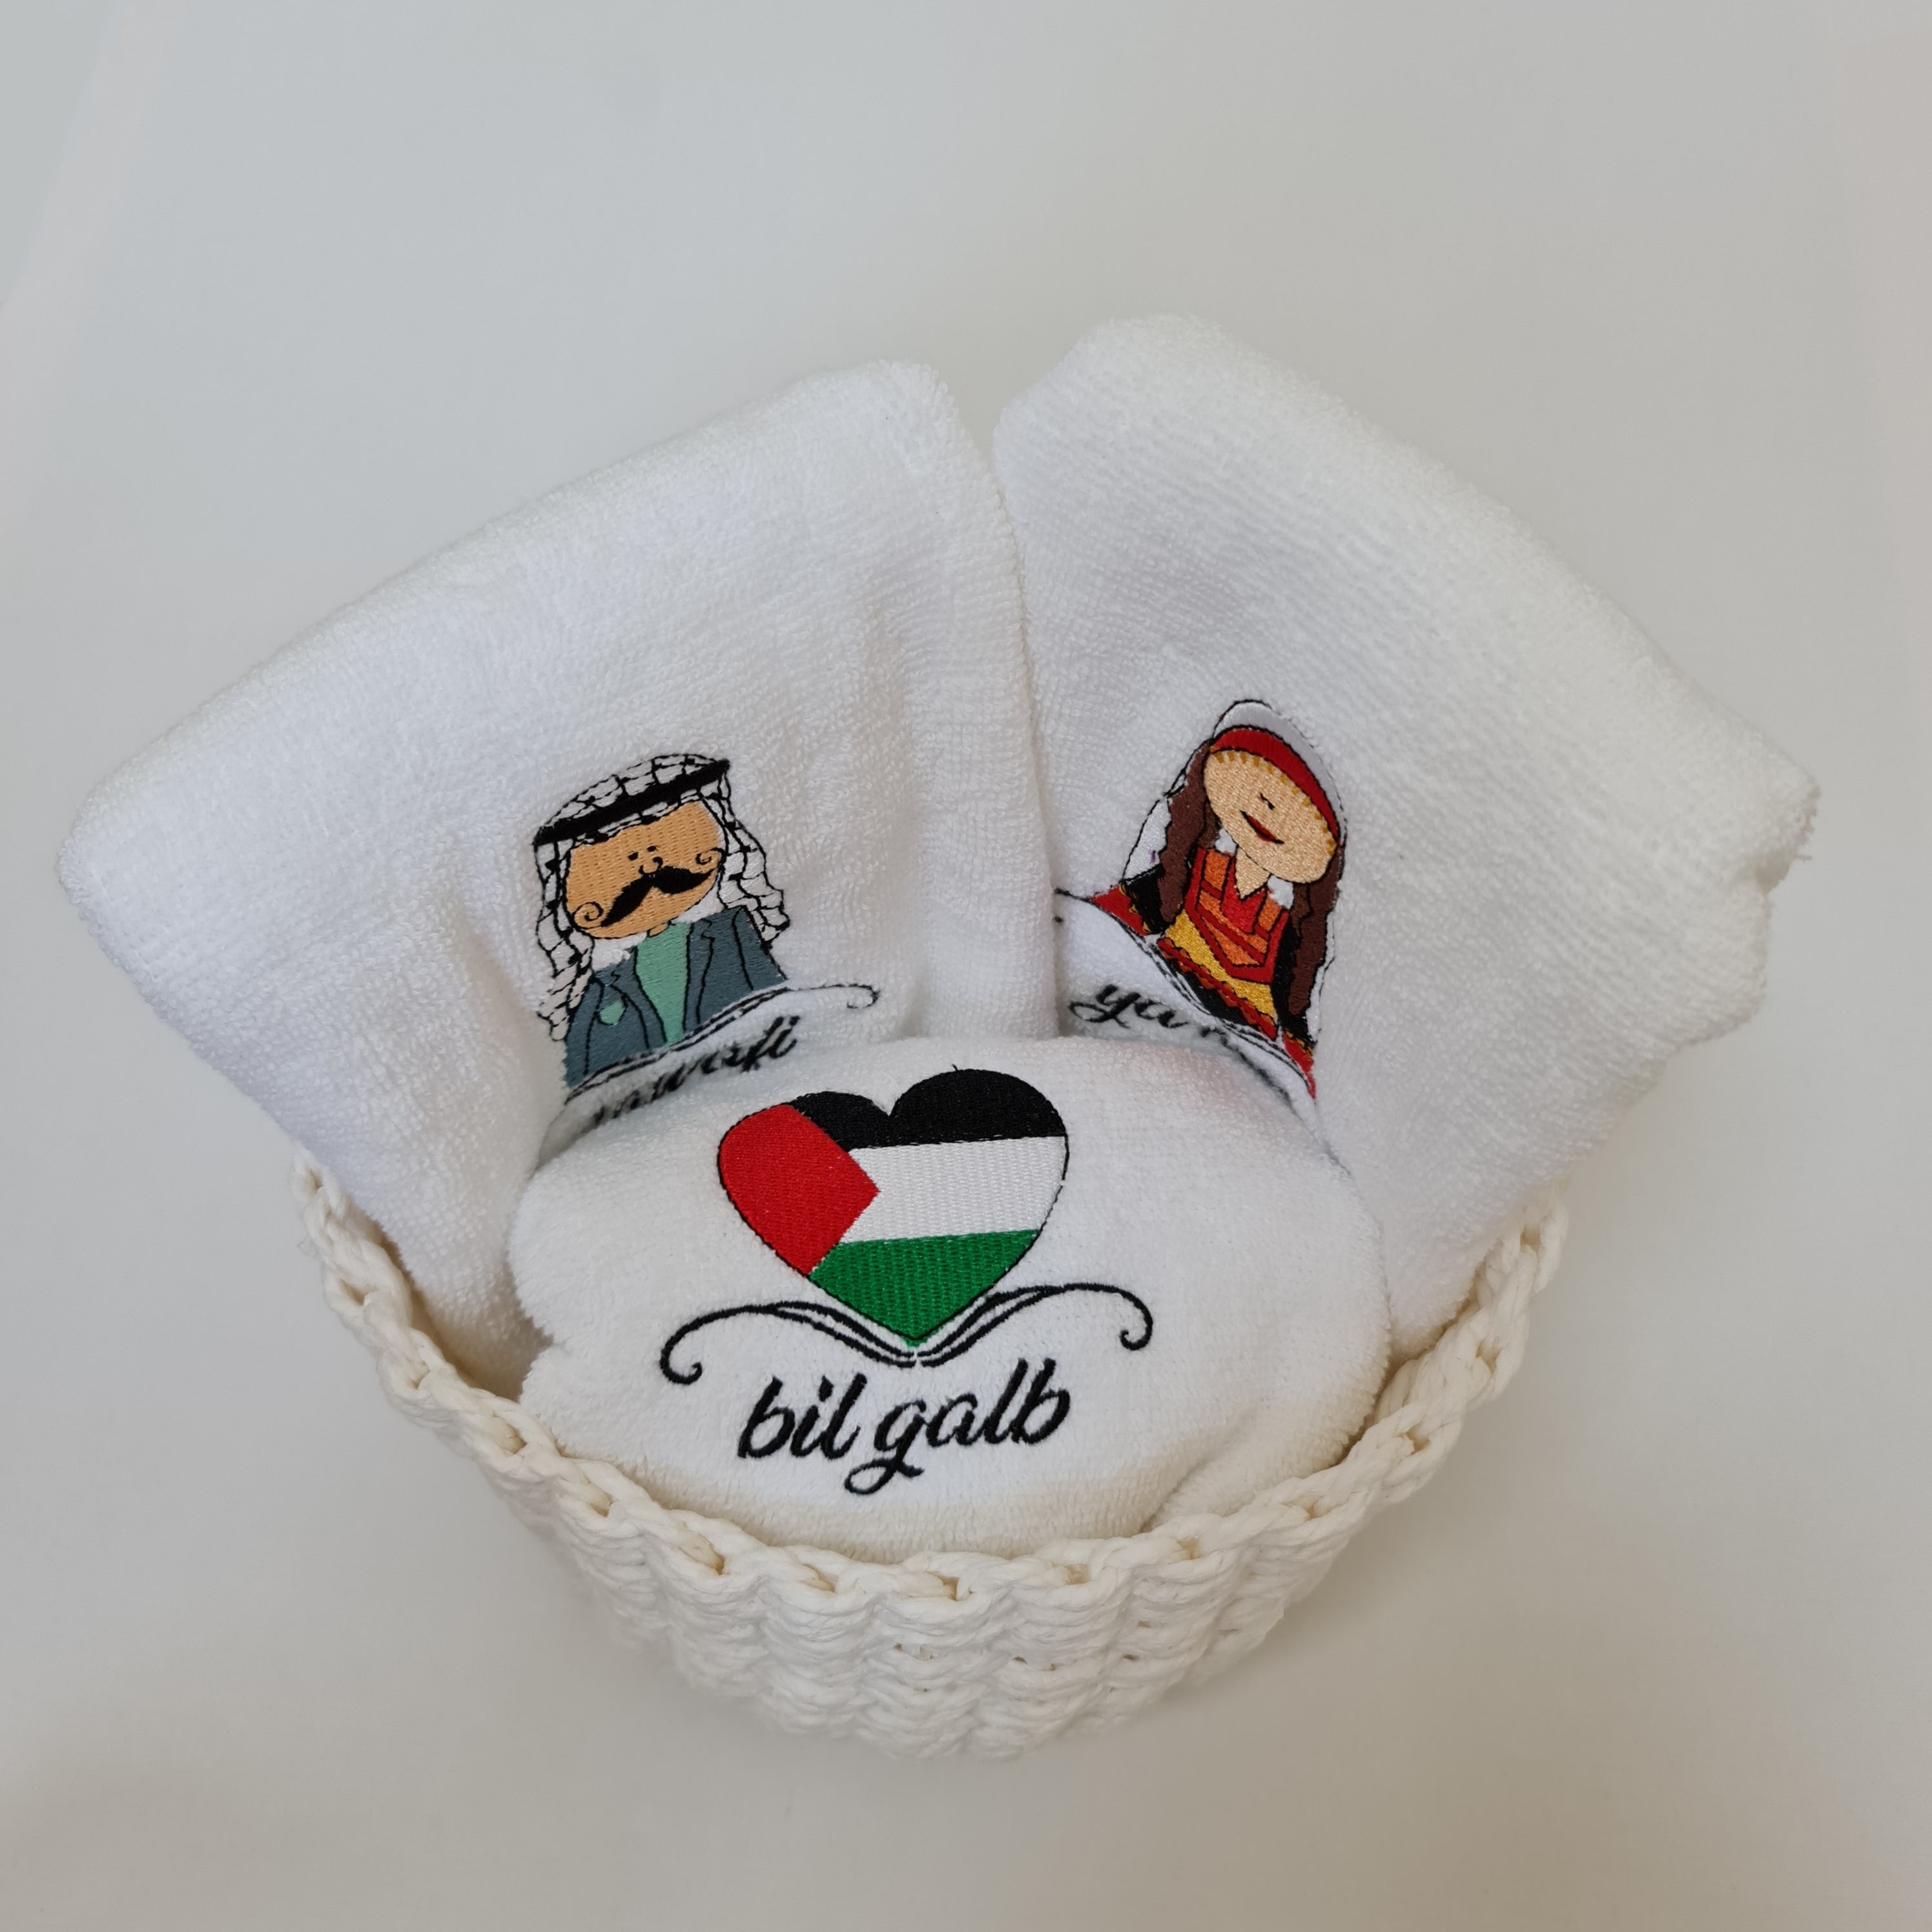 Embroidered set of 3 Palestinian towels to decorate your guest bathroom or to offer as a souvenir. High quality 40x70 cm cotton towels.